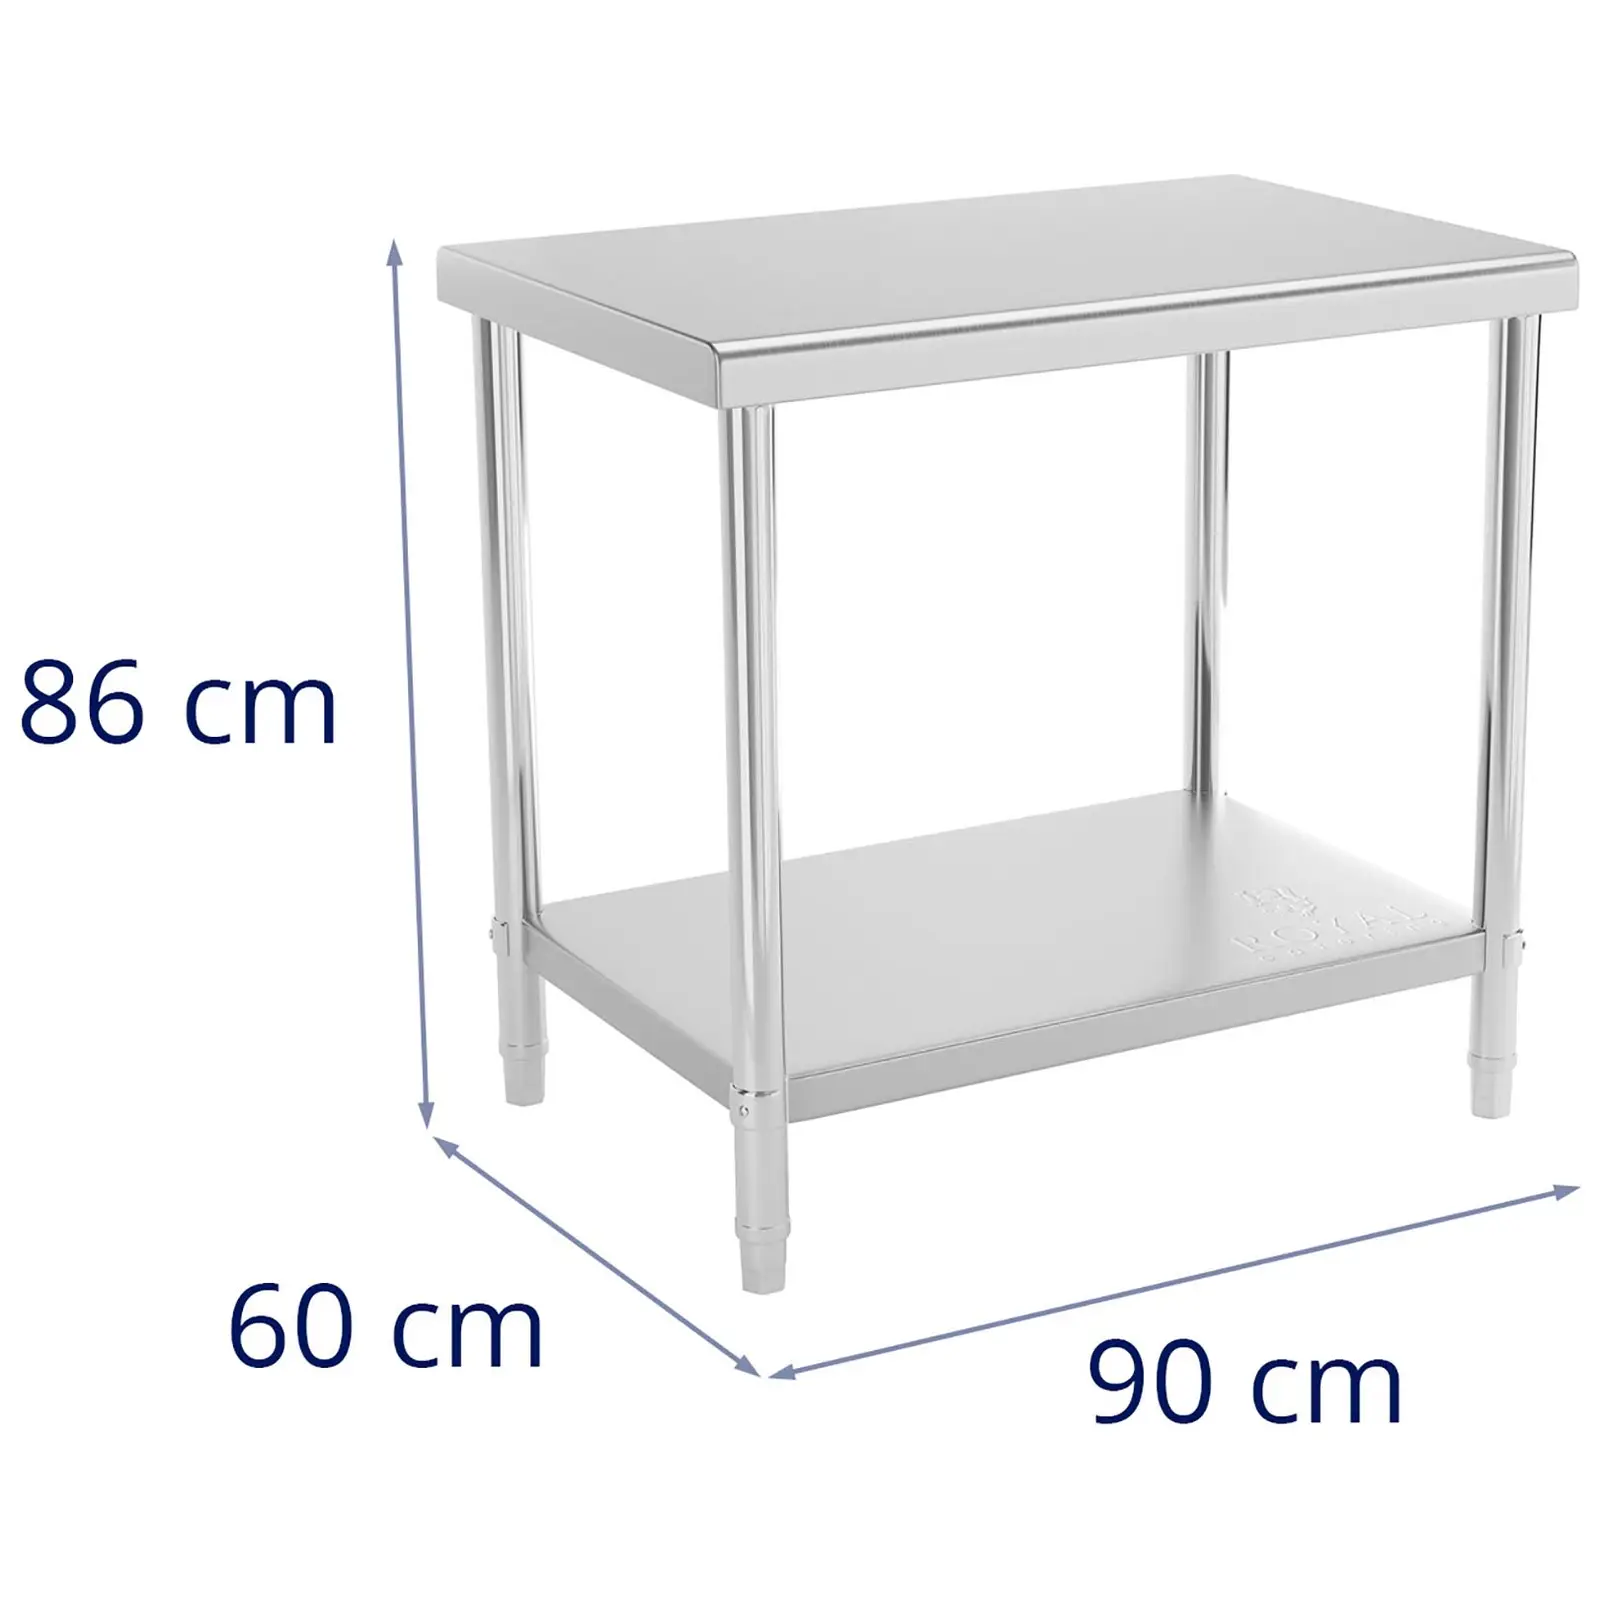 Stainless Steel Work Table - 90 x 60 cm - 210 kg load capacity